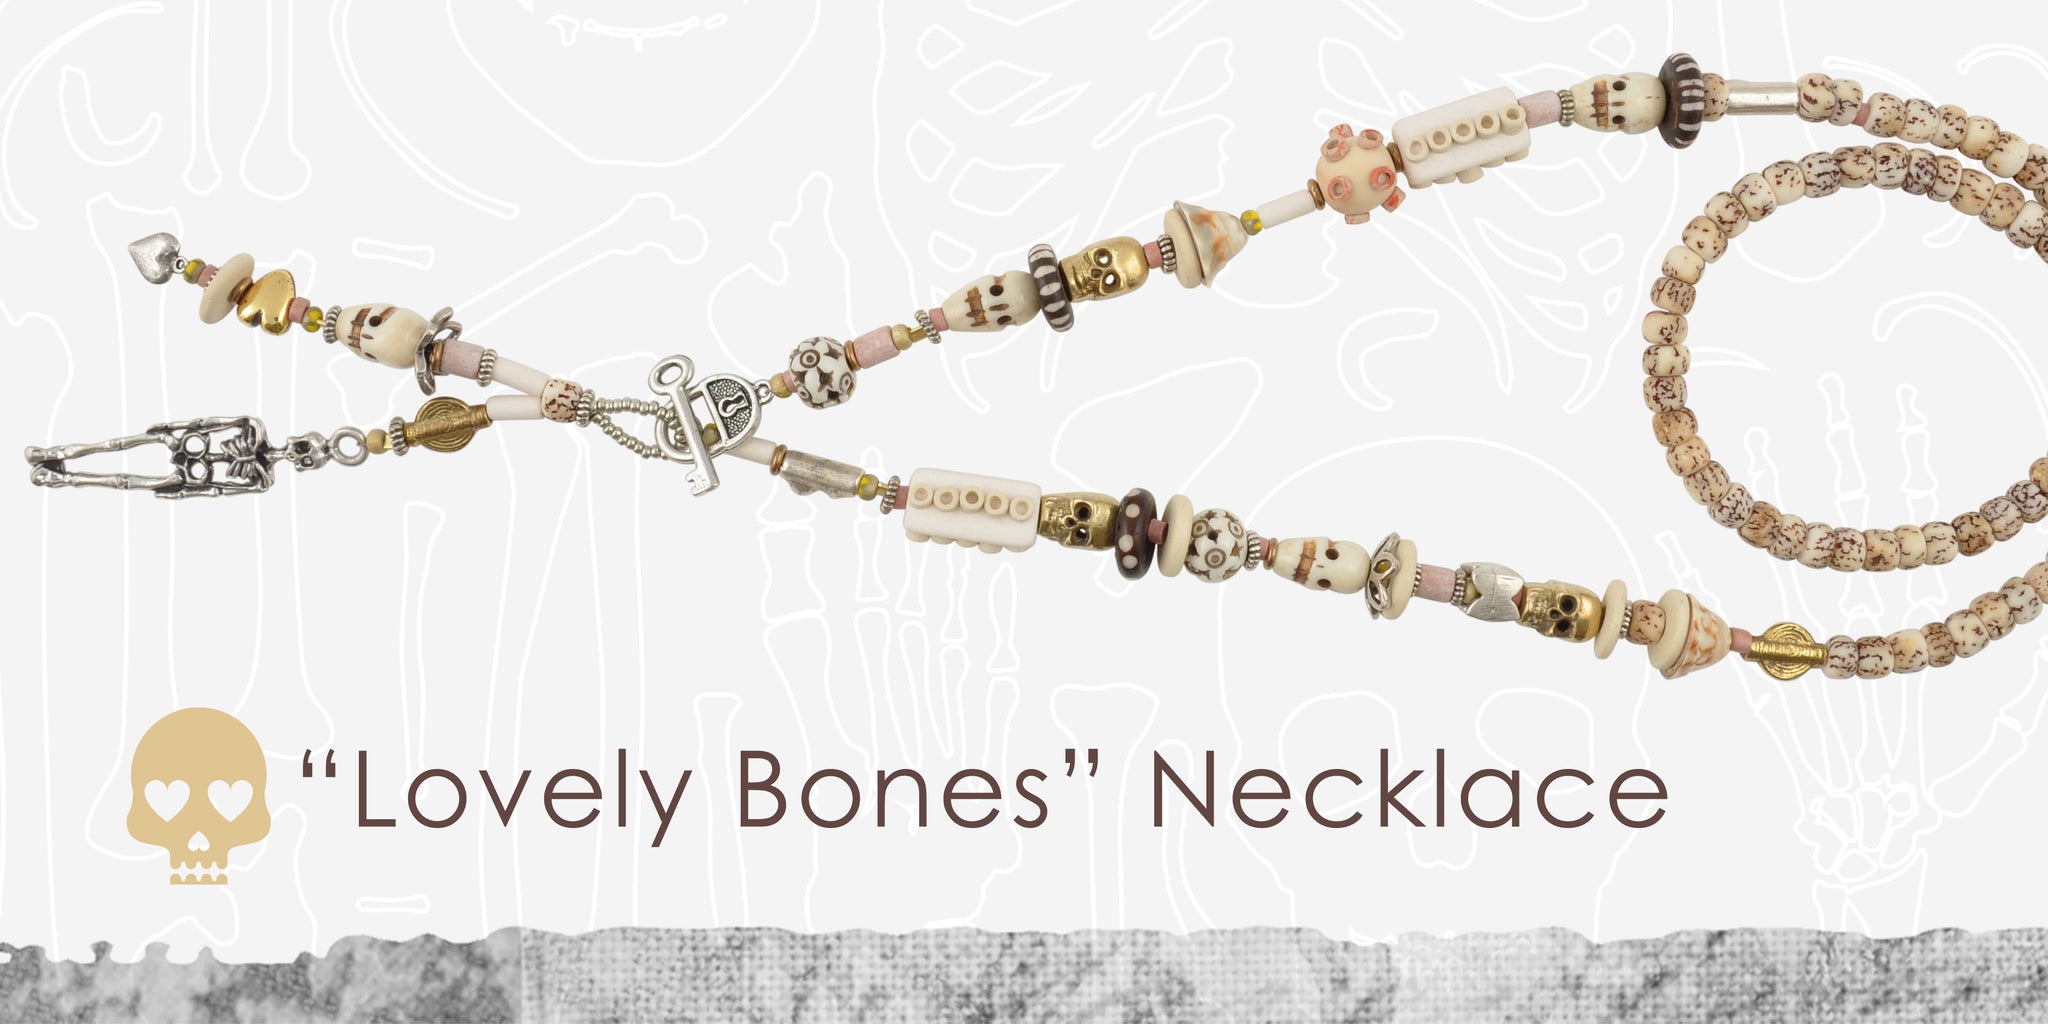 Lovely Bones Necklace Components choiyeonhee